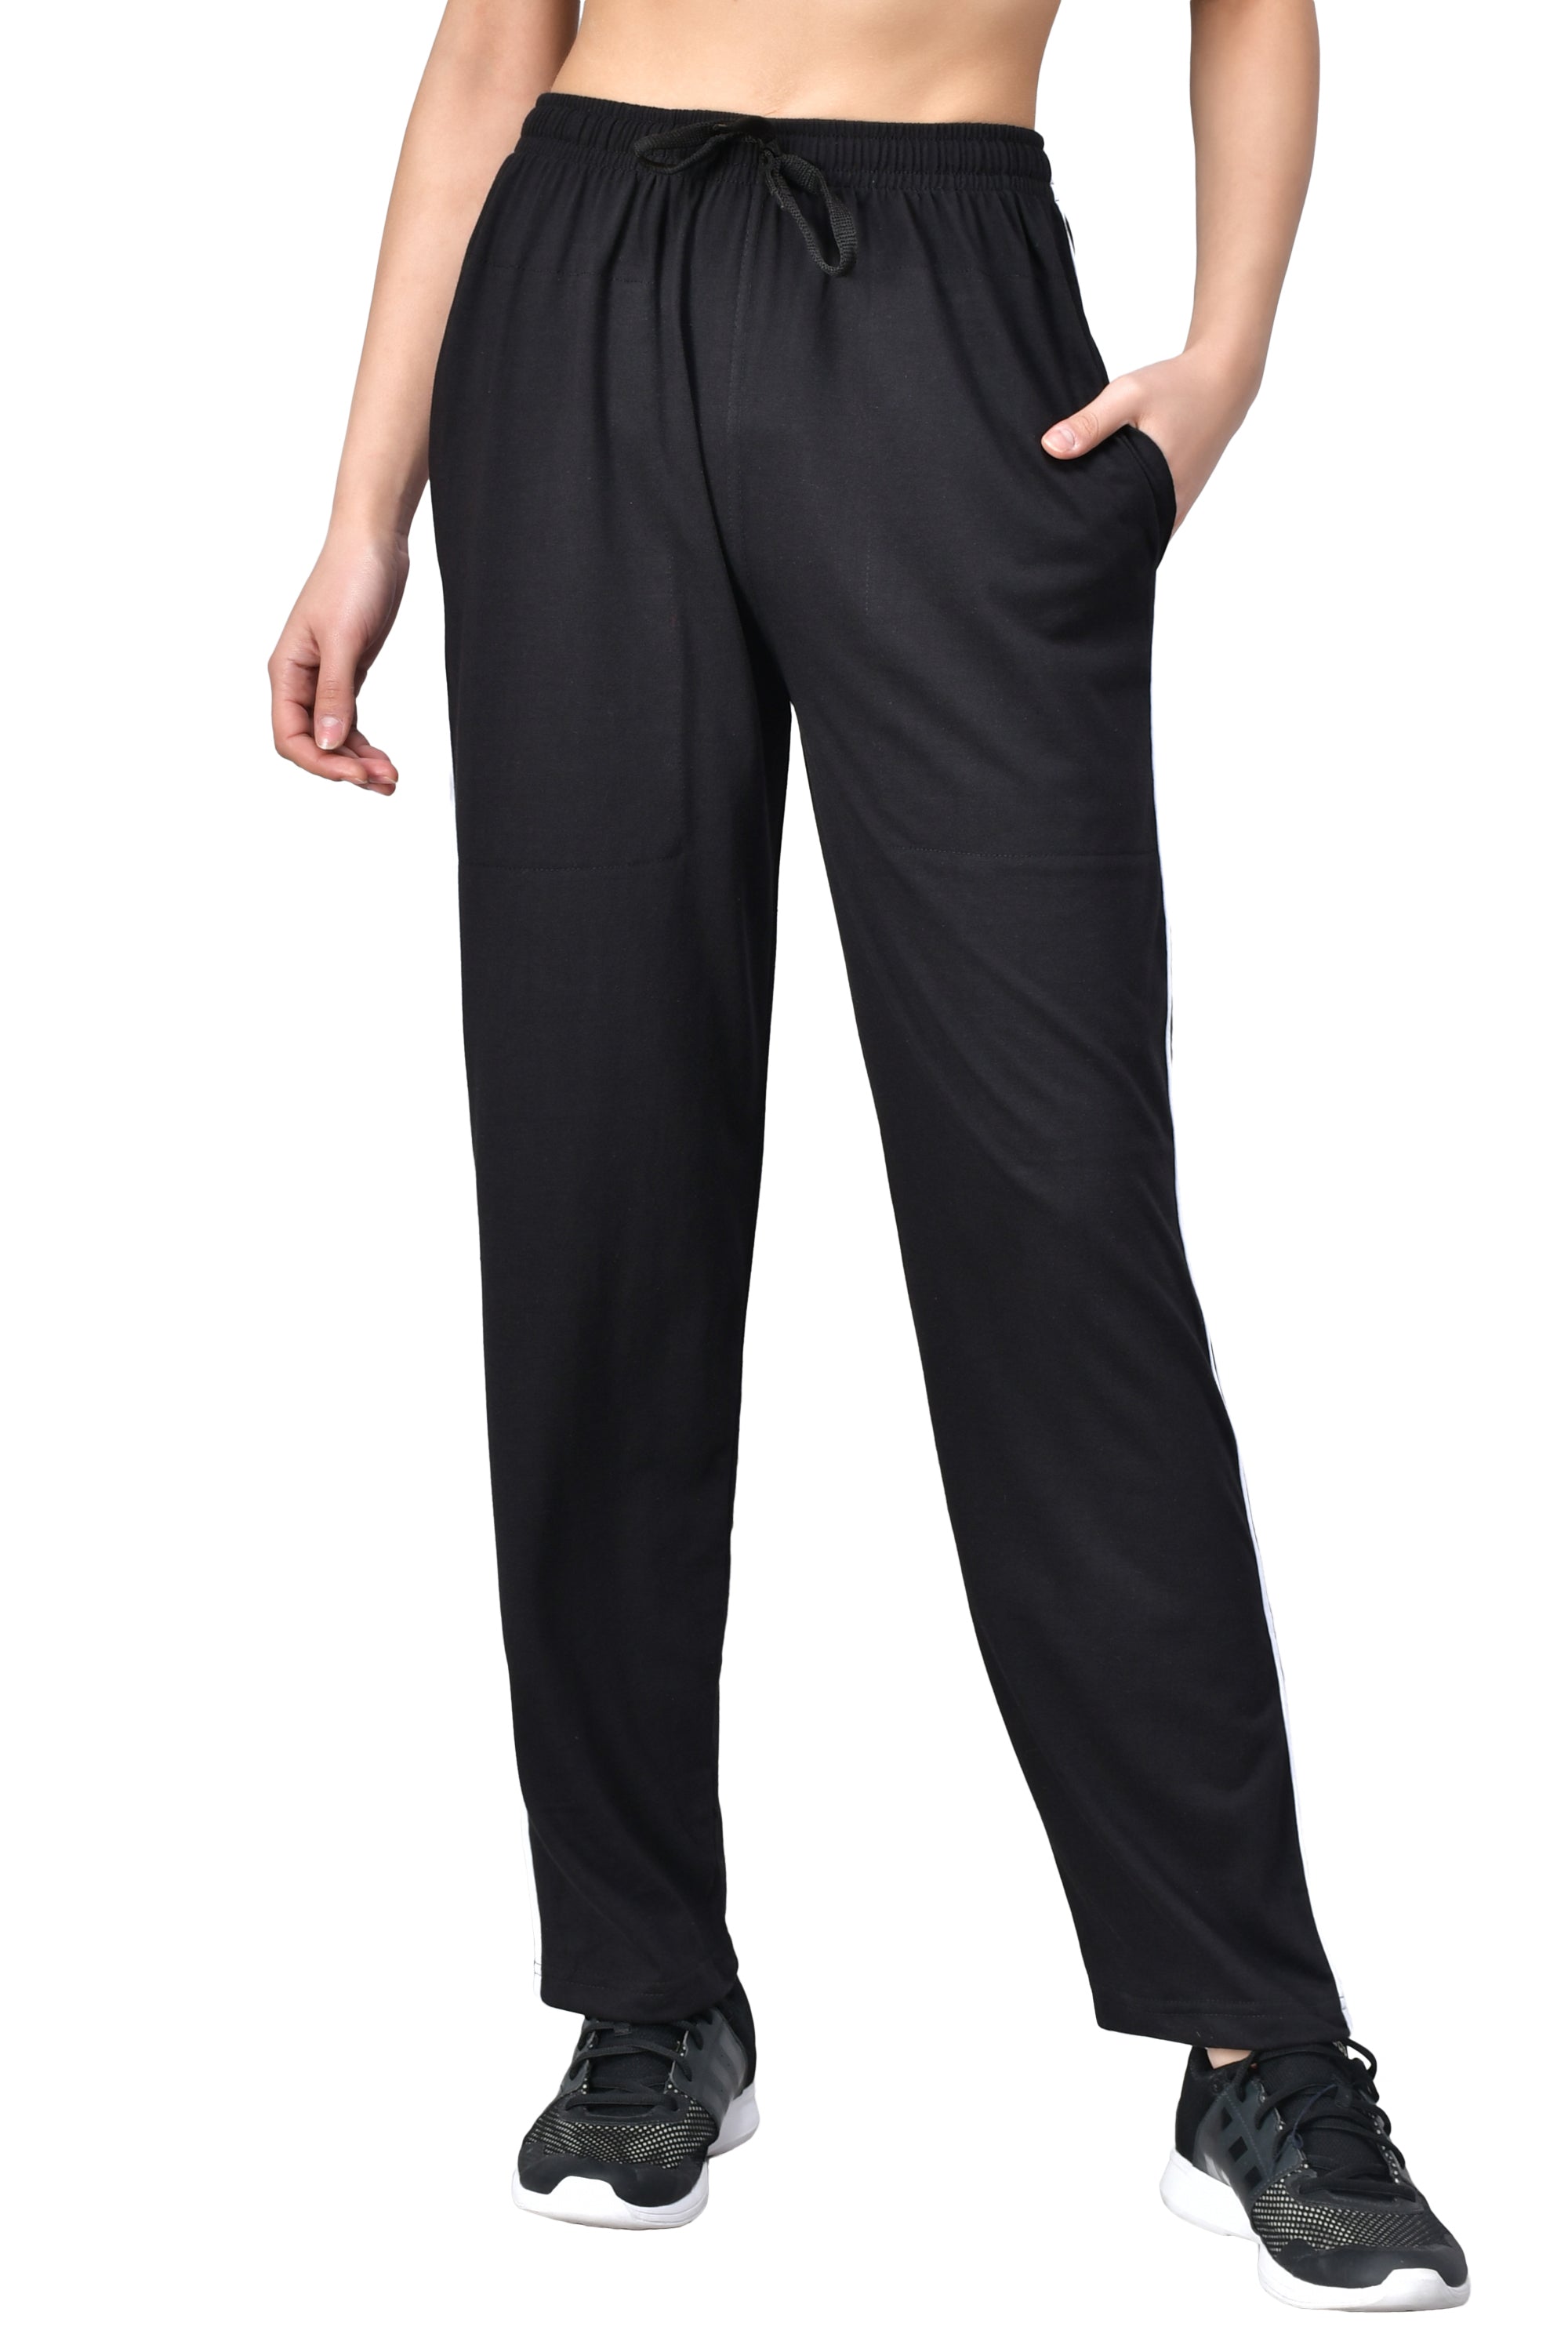 Buy Kissero Dry Fit Solid Womens Solid Black with Red Stripe Track Pant  SizeXLarge Online at Best Prices in India  JioMart